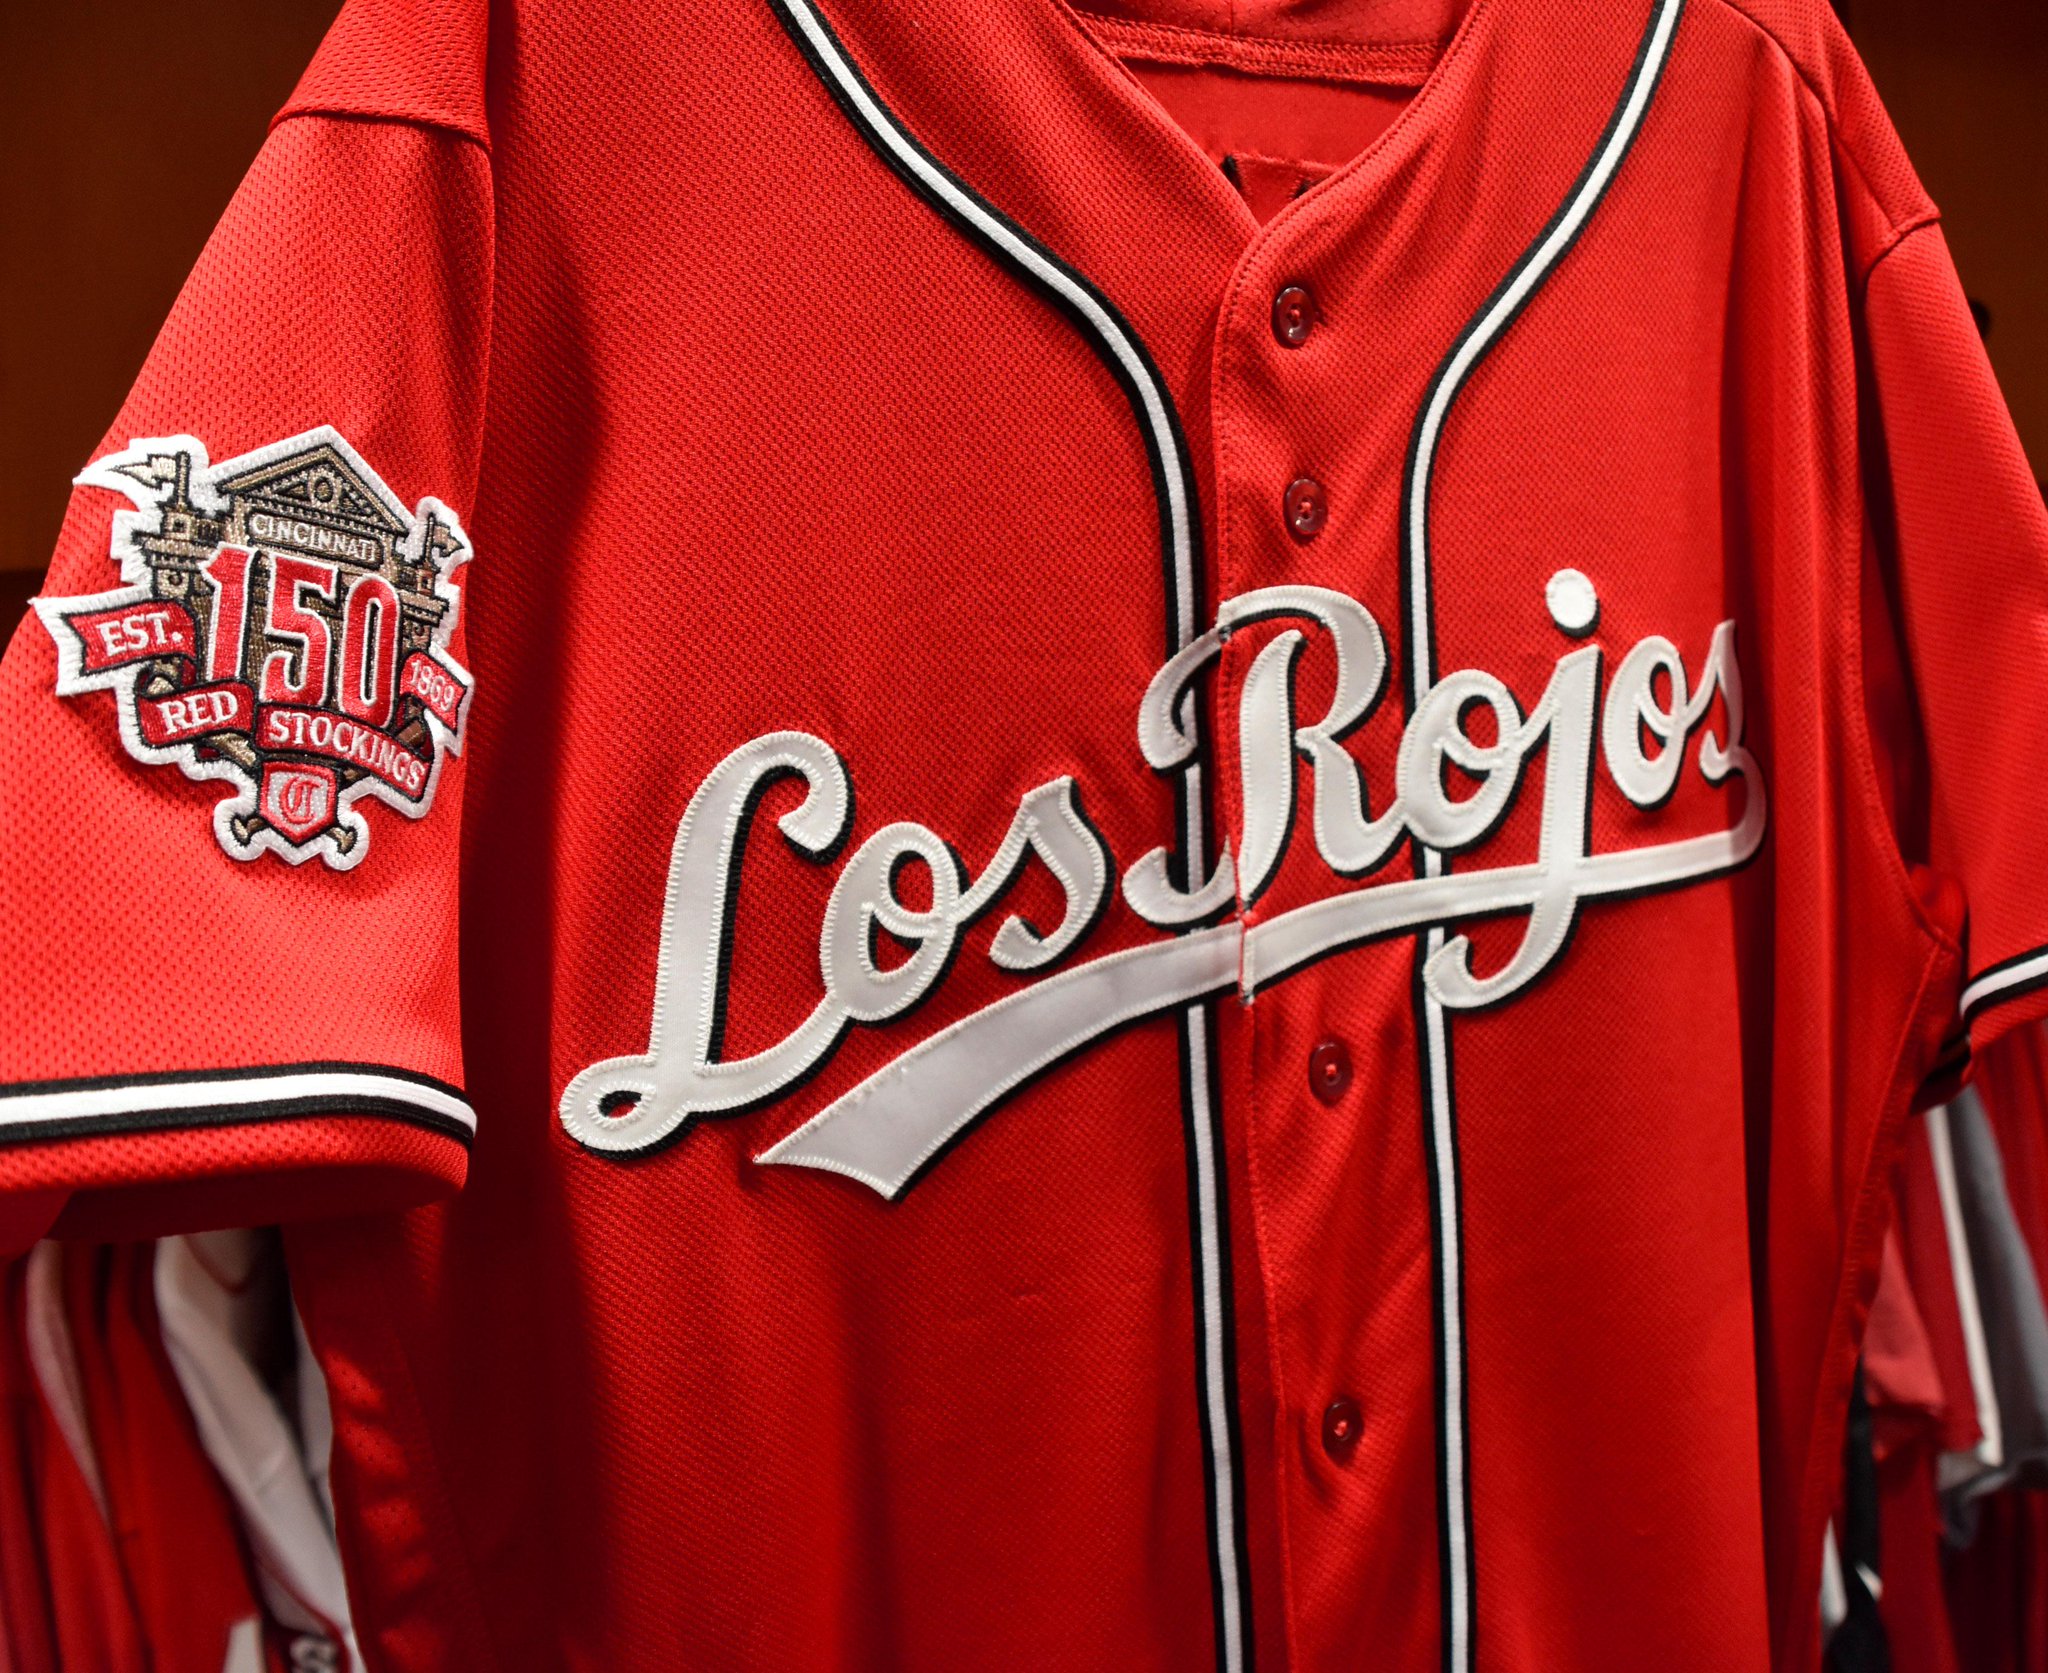 Cincinnati Reds on X: The Reds tonight will don Los Rojos jerseys as part  of Fiesta Rojos as we honor the local Hispanic community and the rich  cultural history of the franchise. #